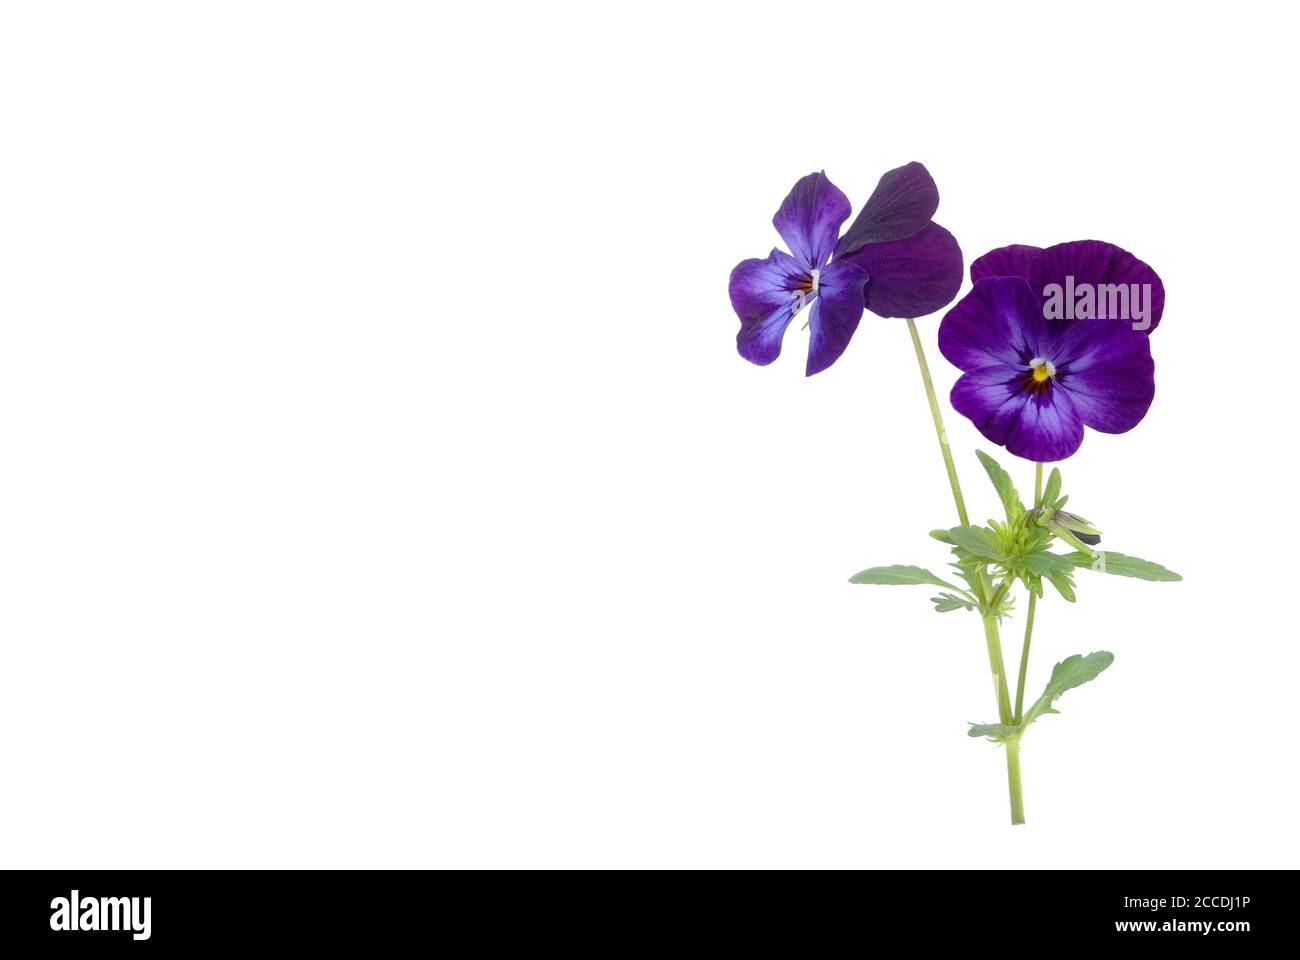 Isolated pansy against white background Stock Photo